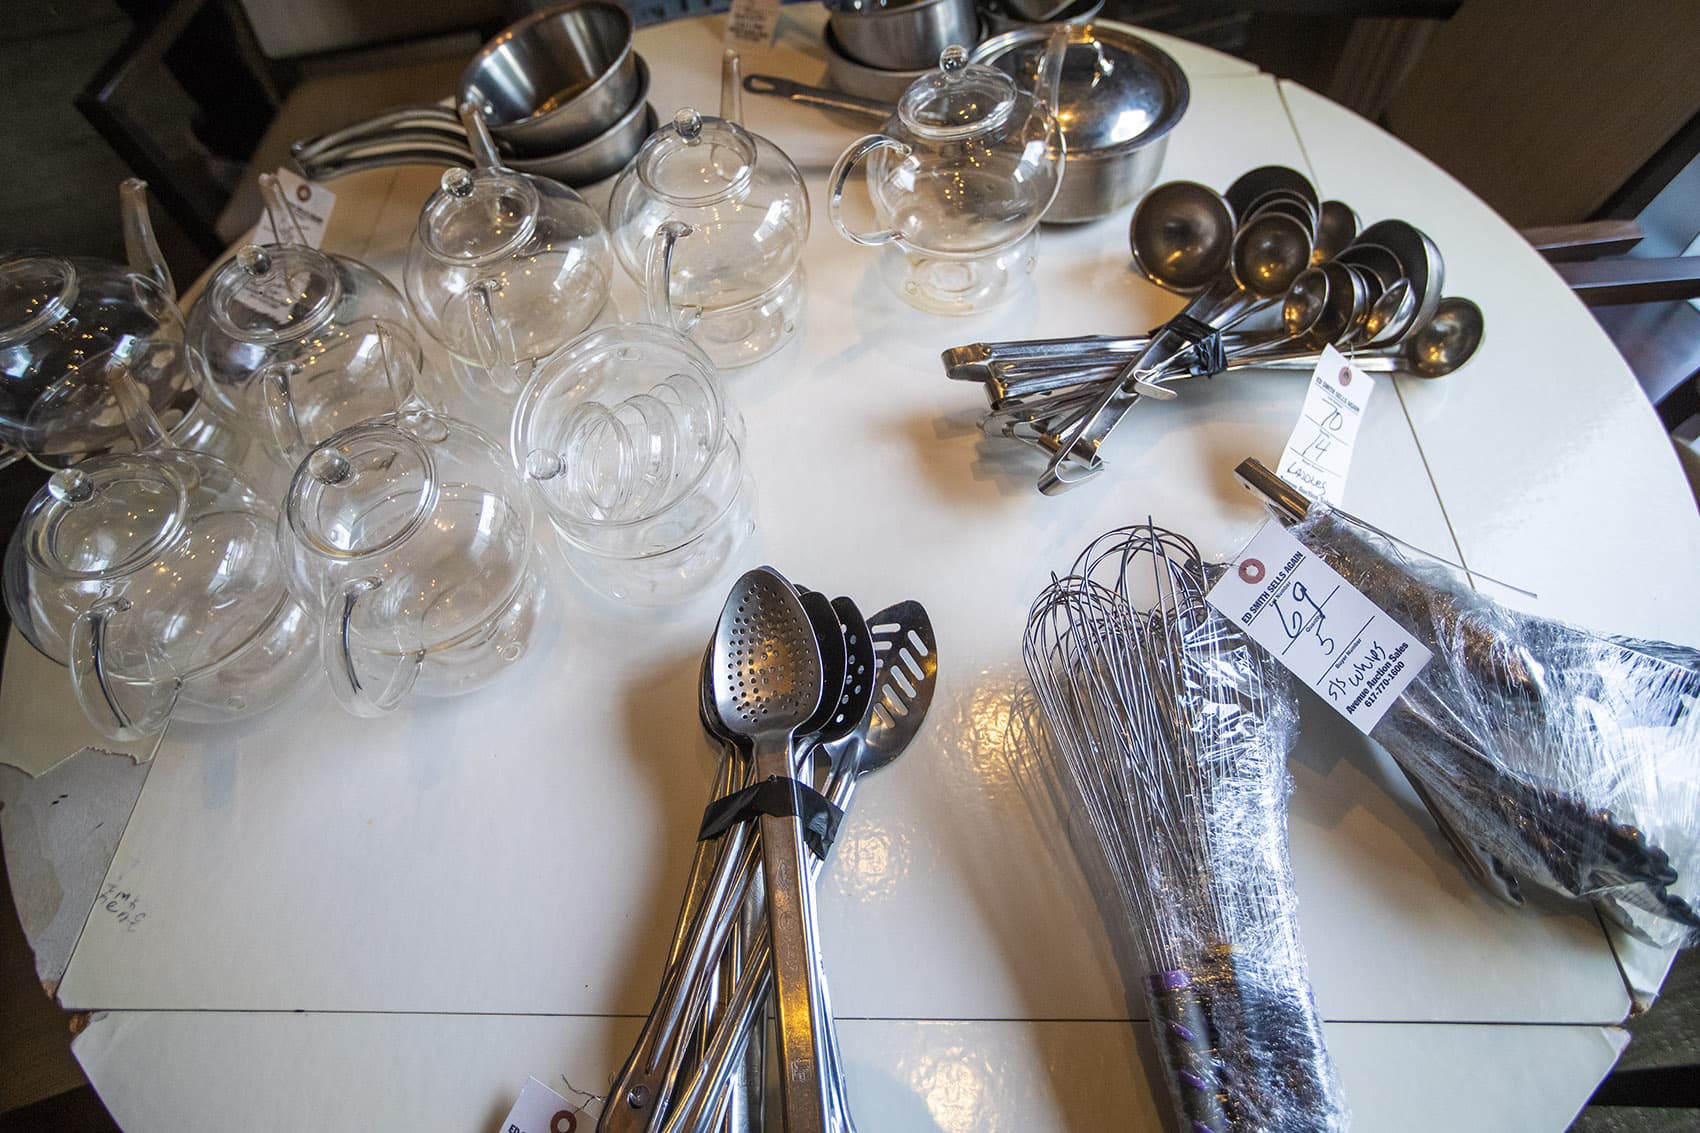 Kitchen utensils and assorted glassware up for auction at the L'Espalier auction. (Jesse Costa/WBUR)